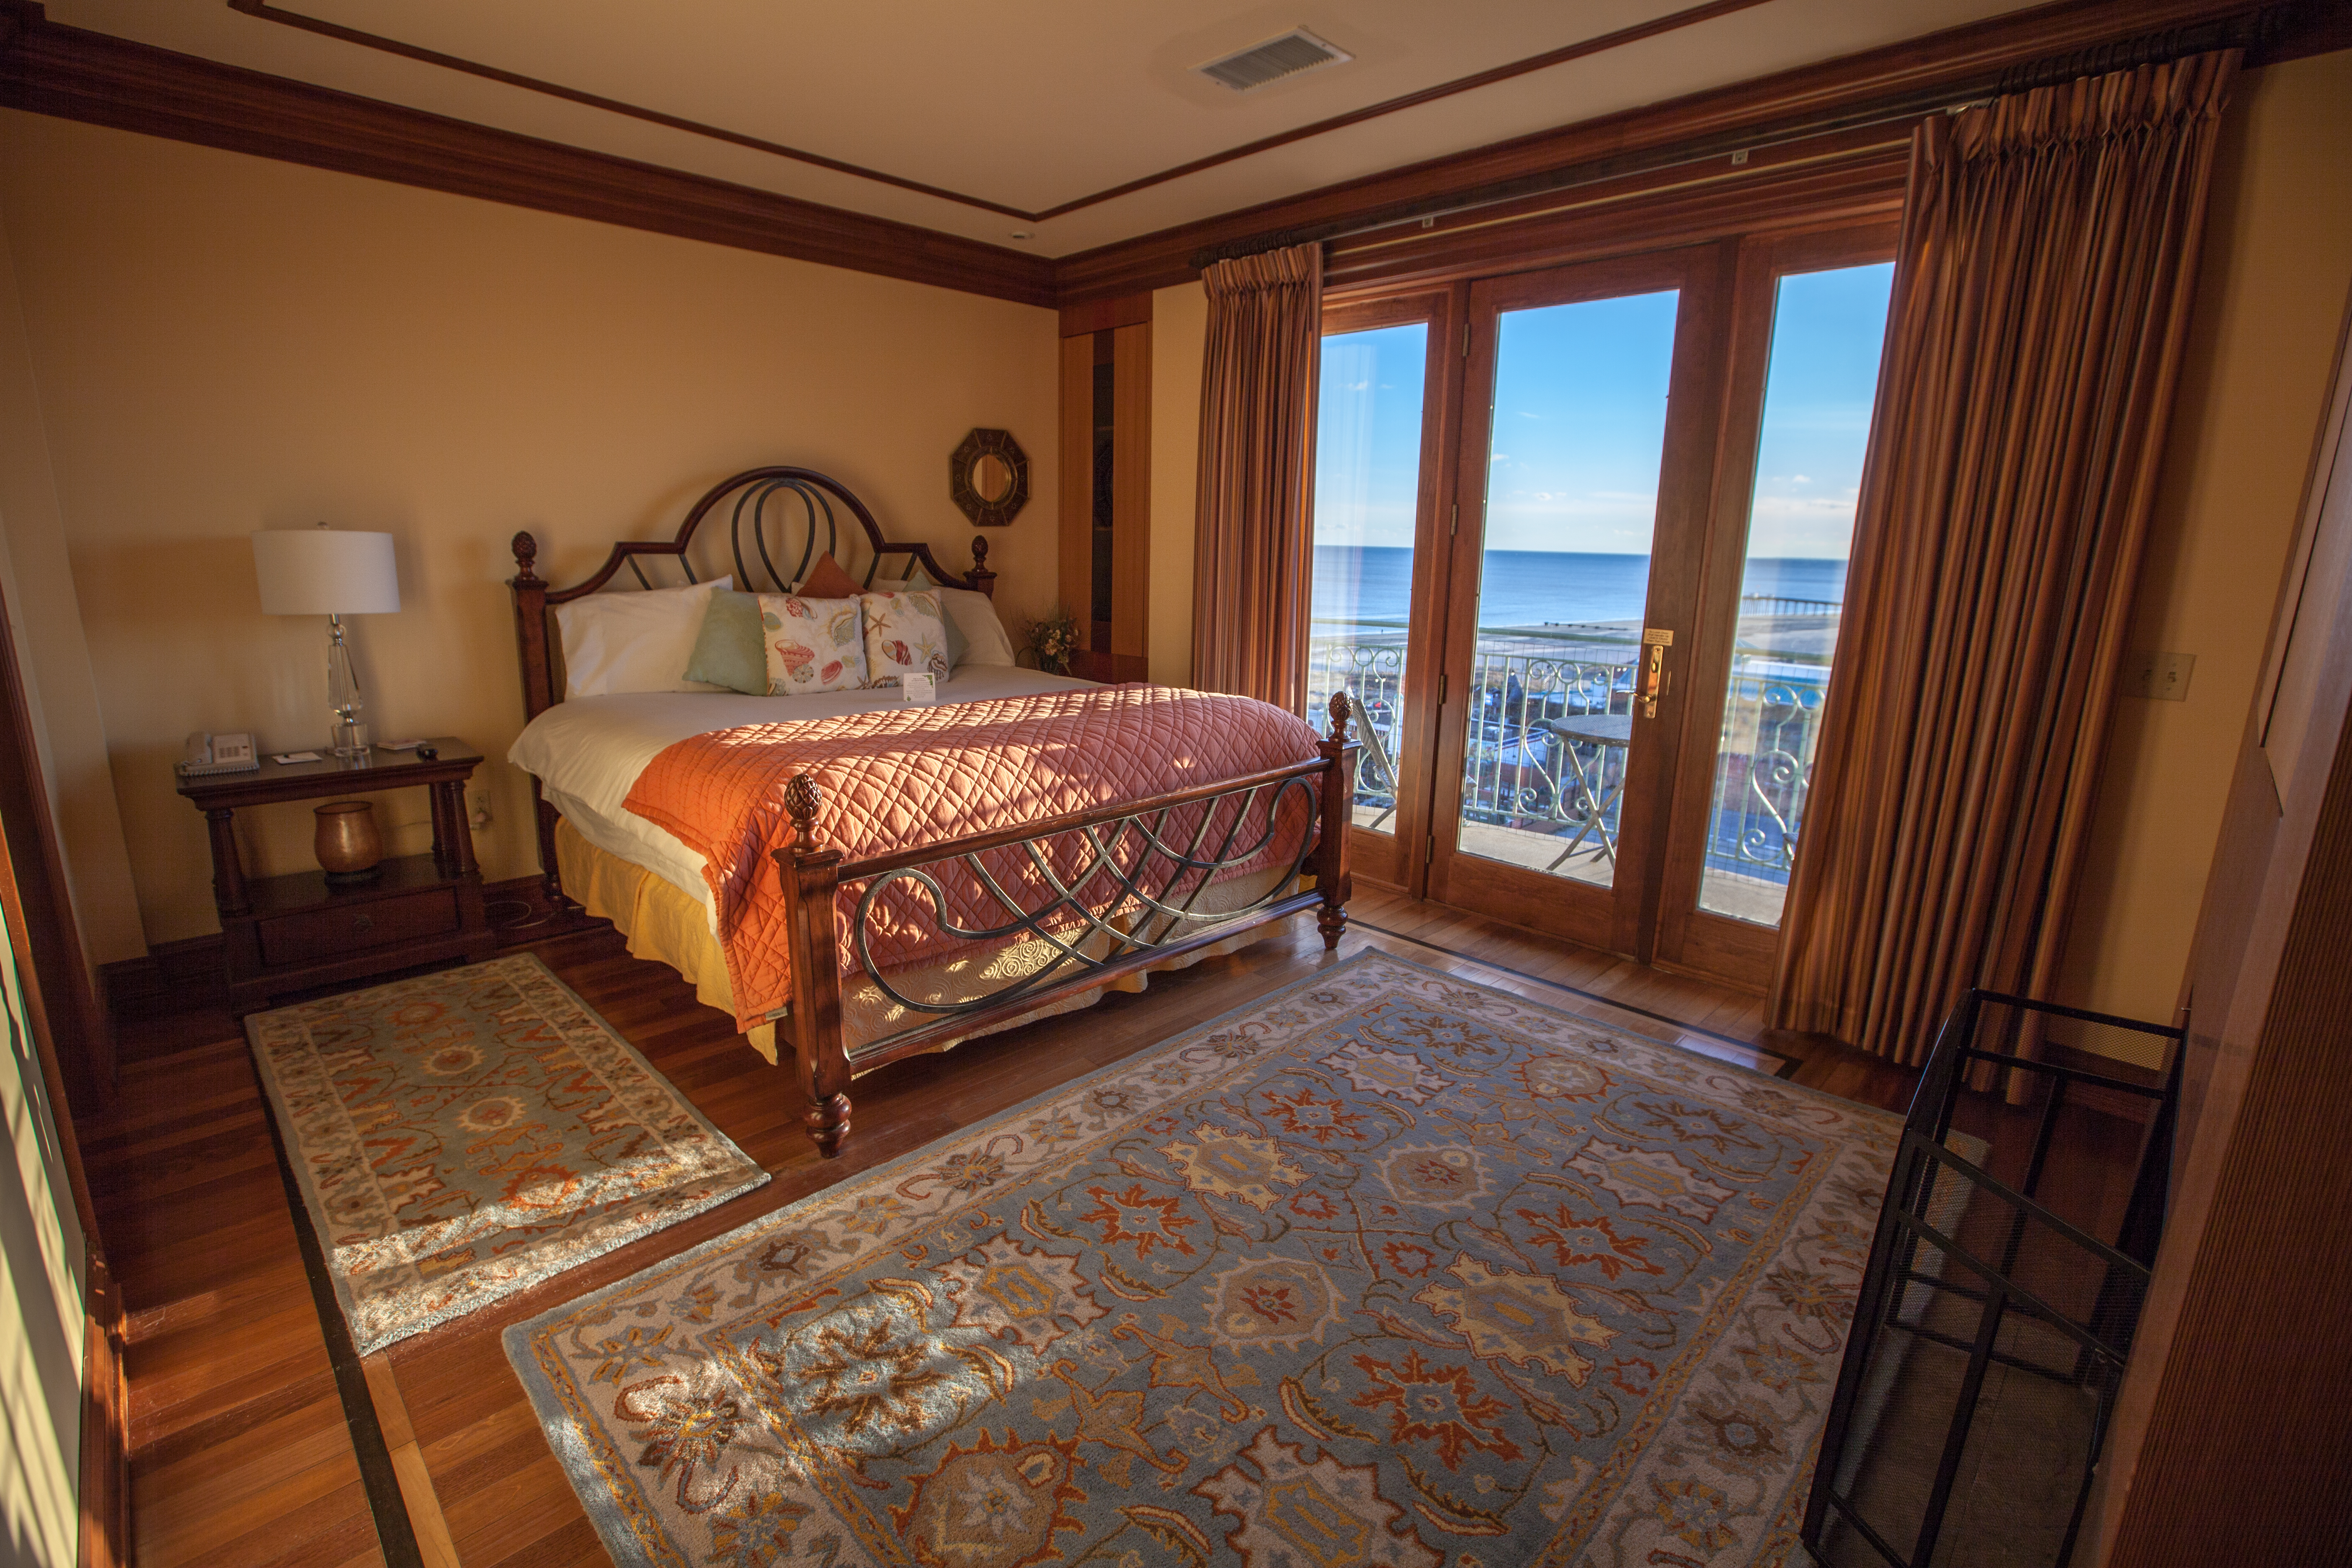 Penthouse bedroom with skyrise view of the ocean from patio